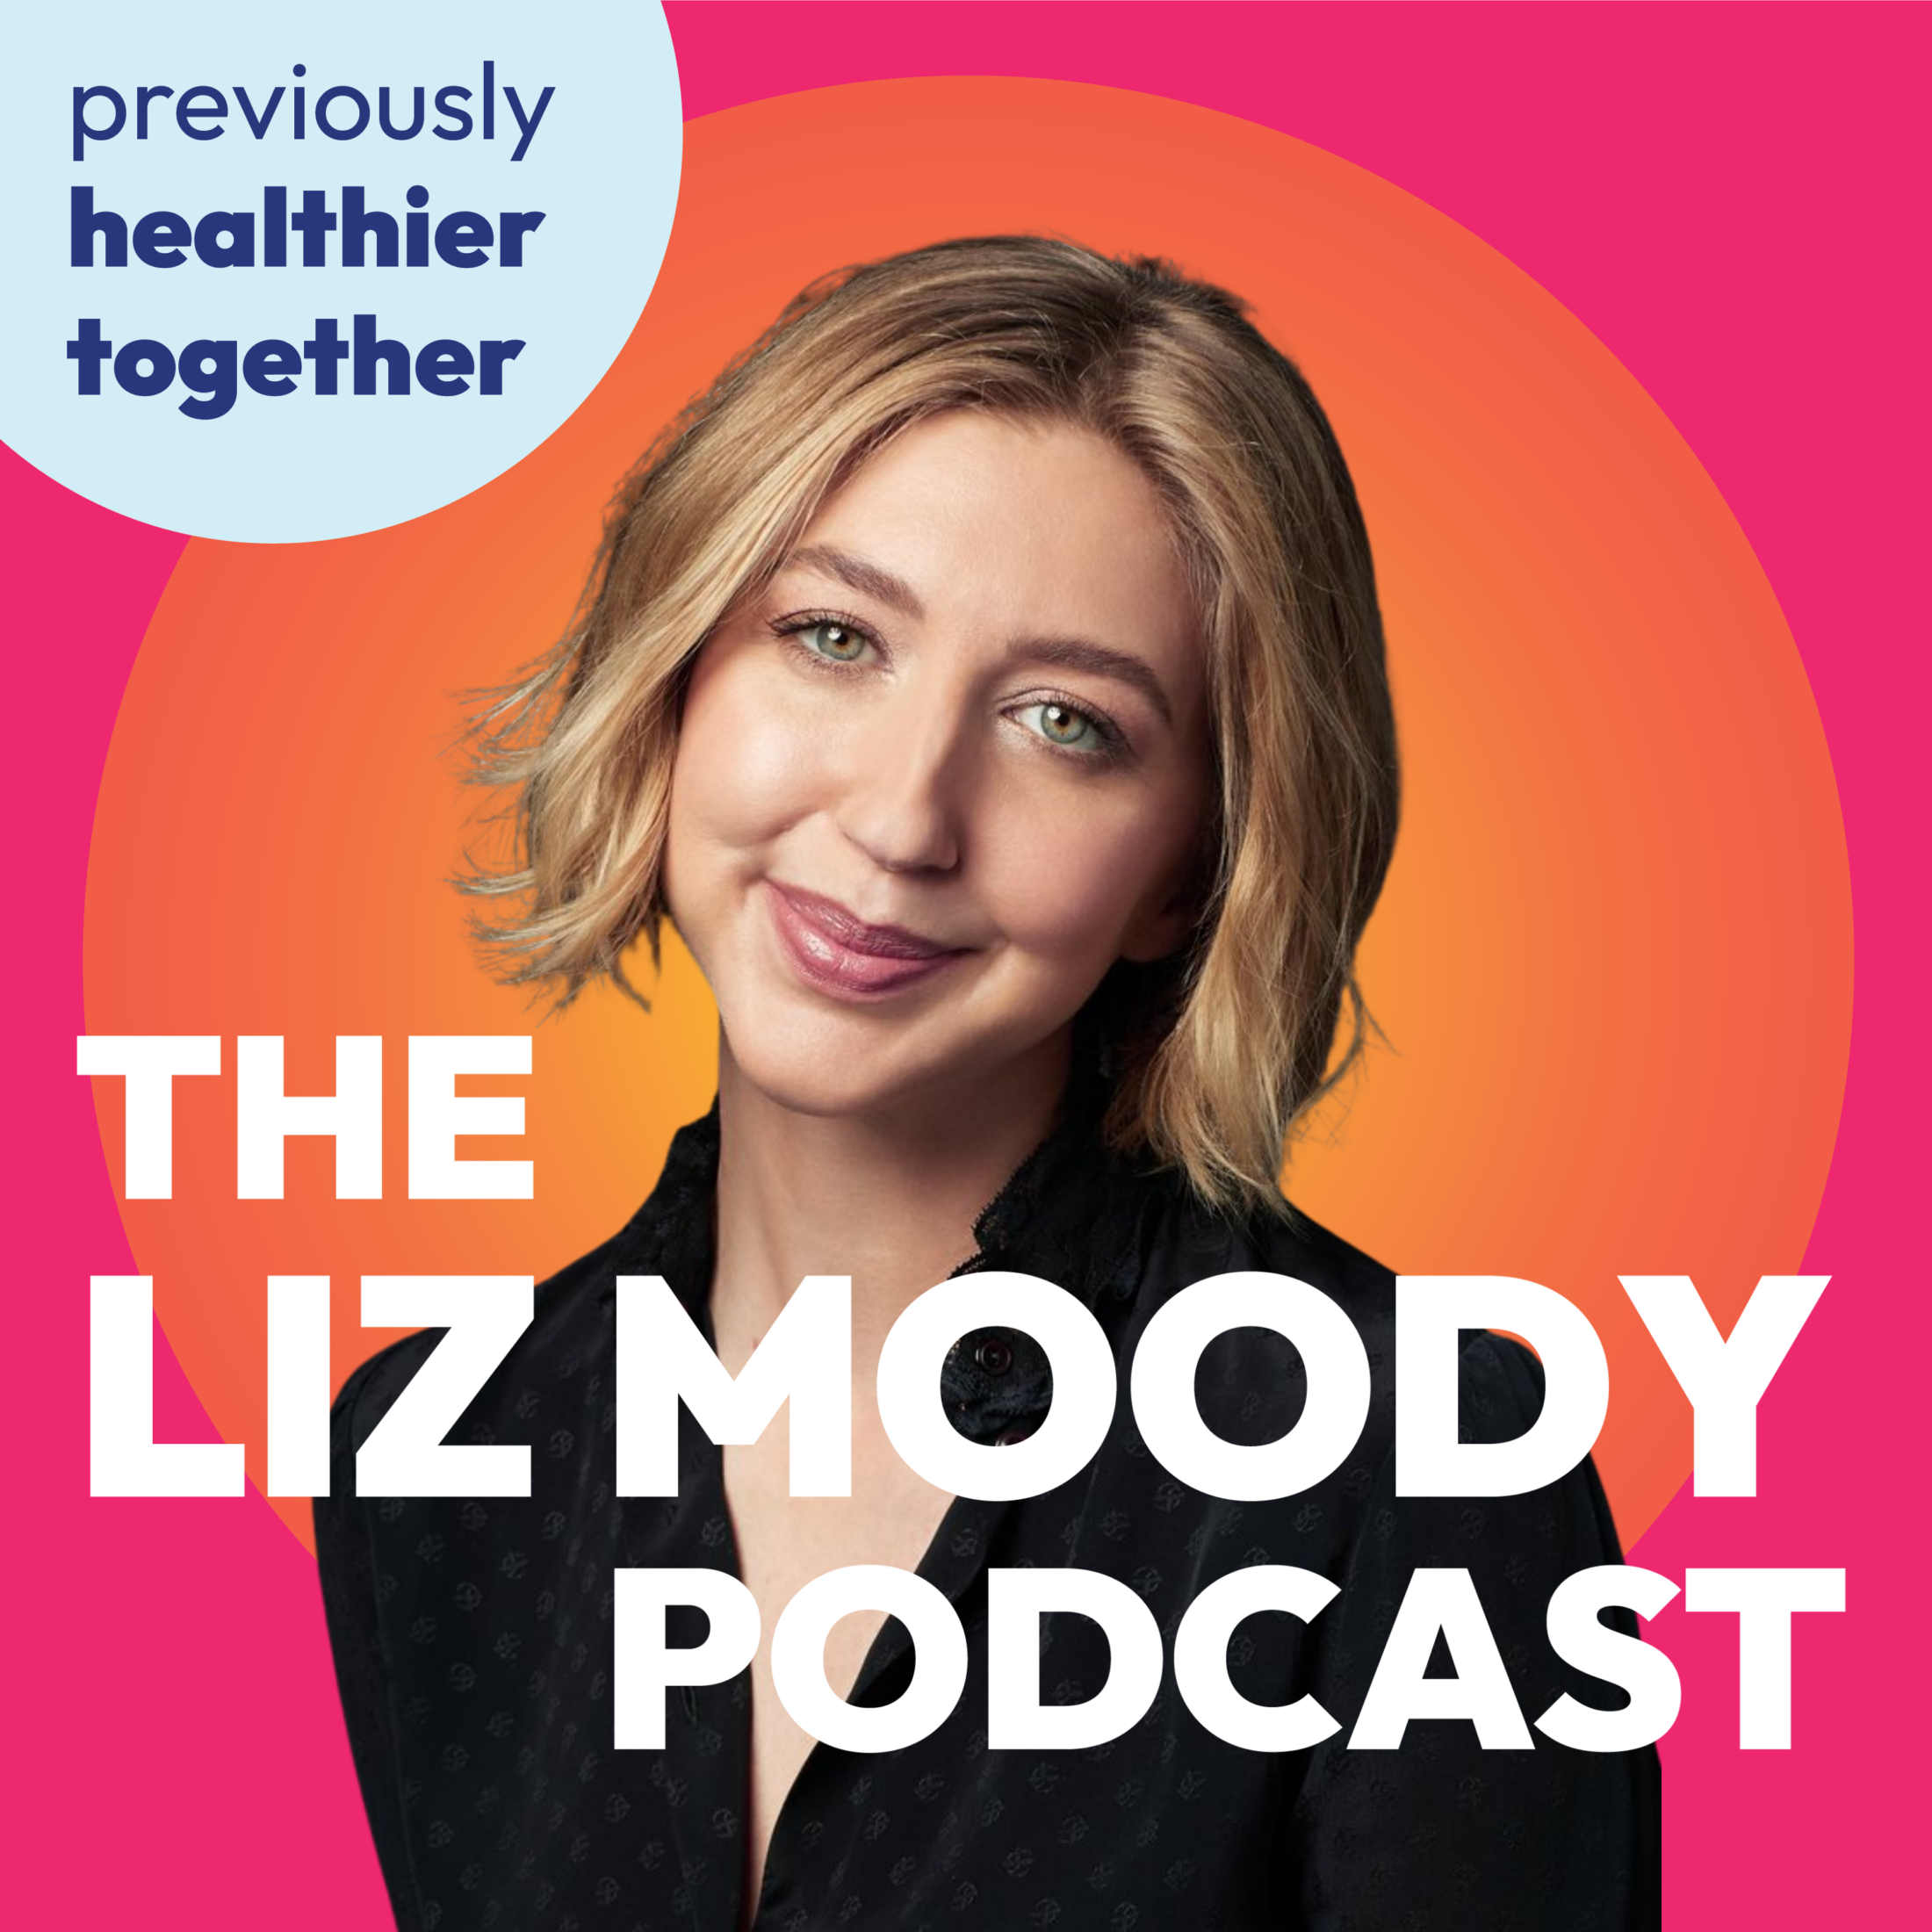 Advice Ep! SNL’s Heidi Gardner On Getting Through Breakups, How To Love Sports, Overcoming Public Speaking Fears, Figuring Out The Best Career & More